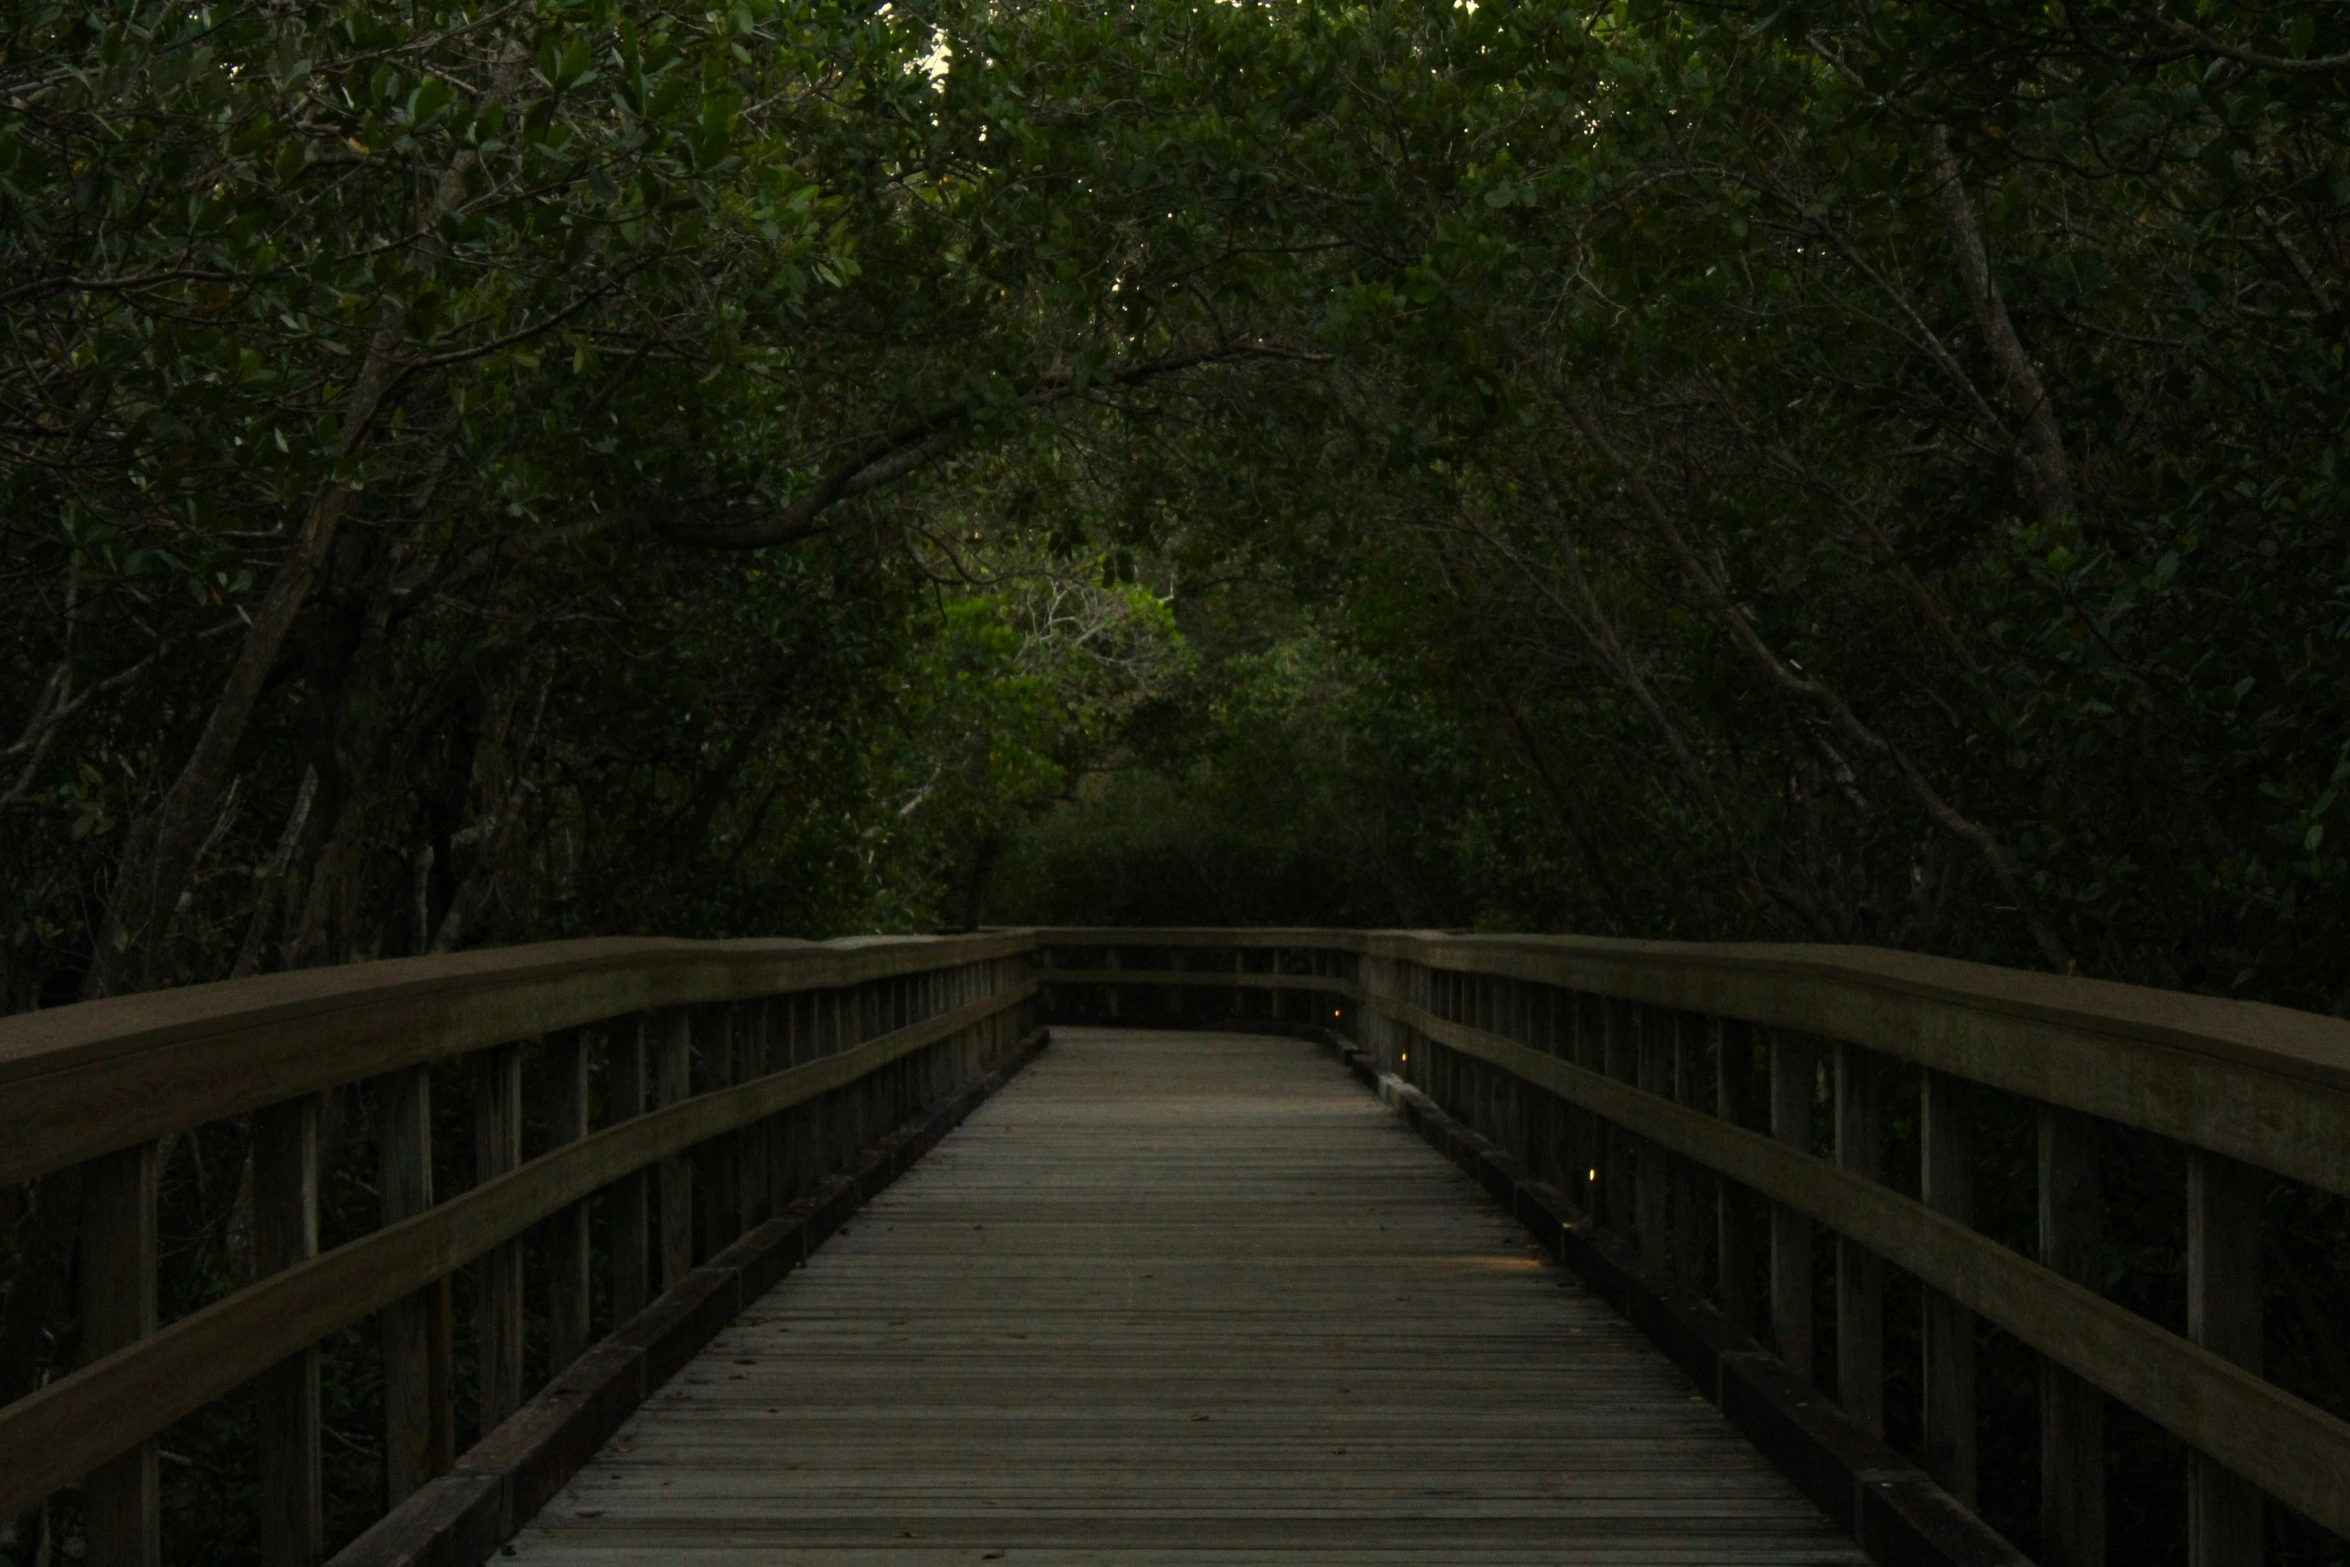 the bridge has wooden railings, and is lined with trees